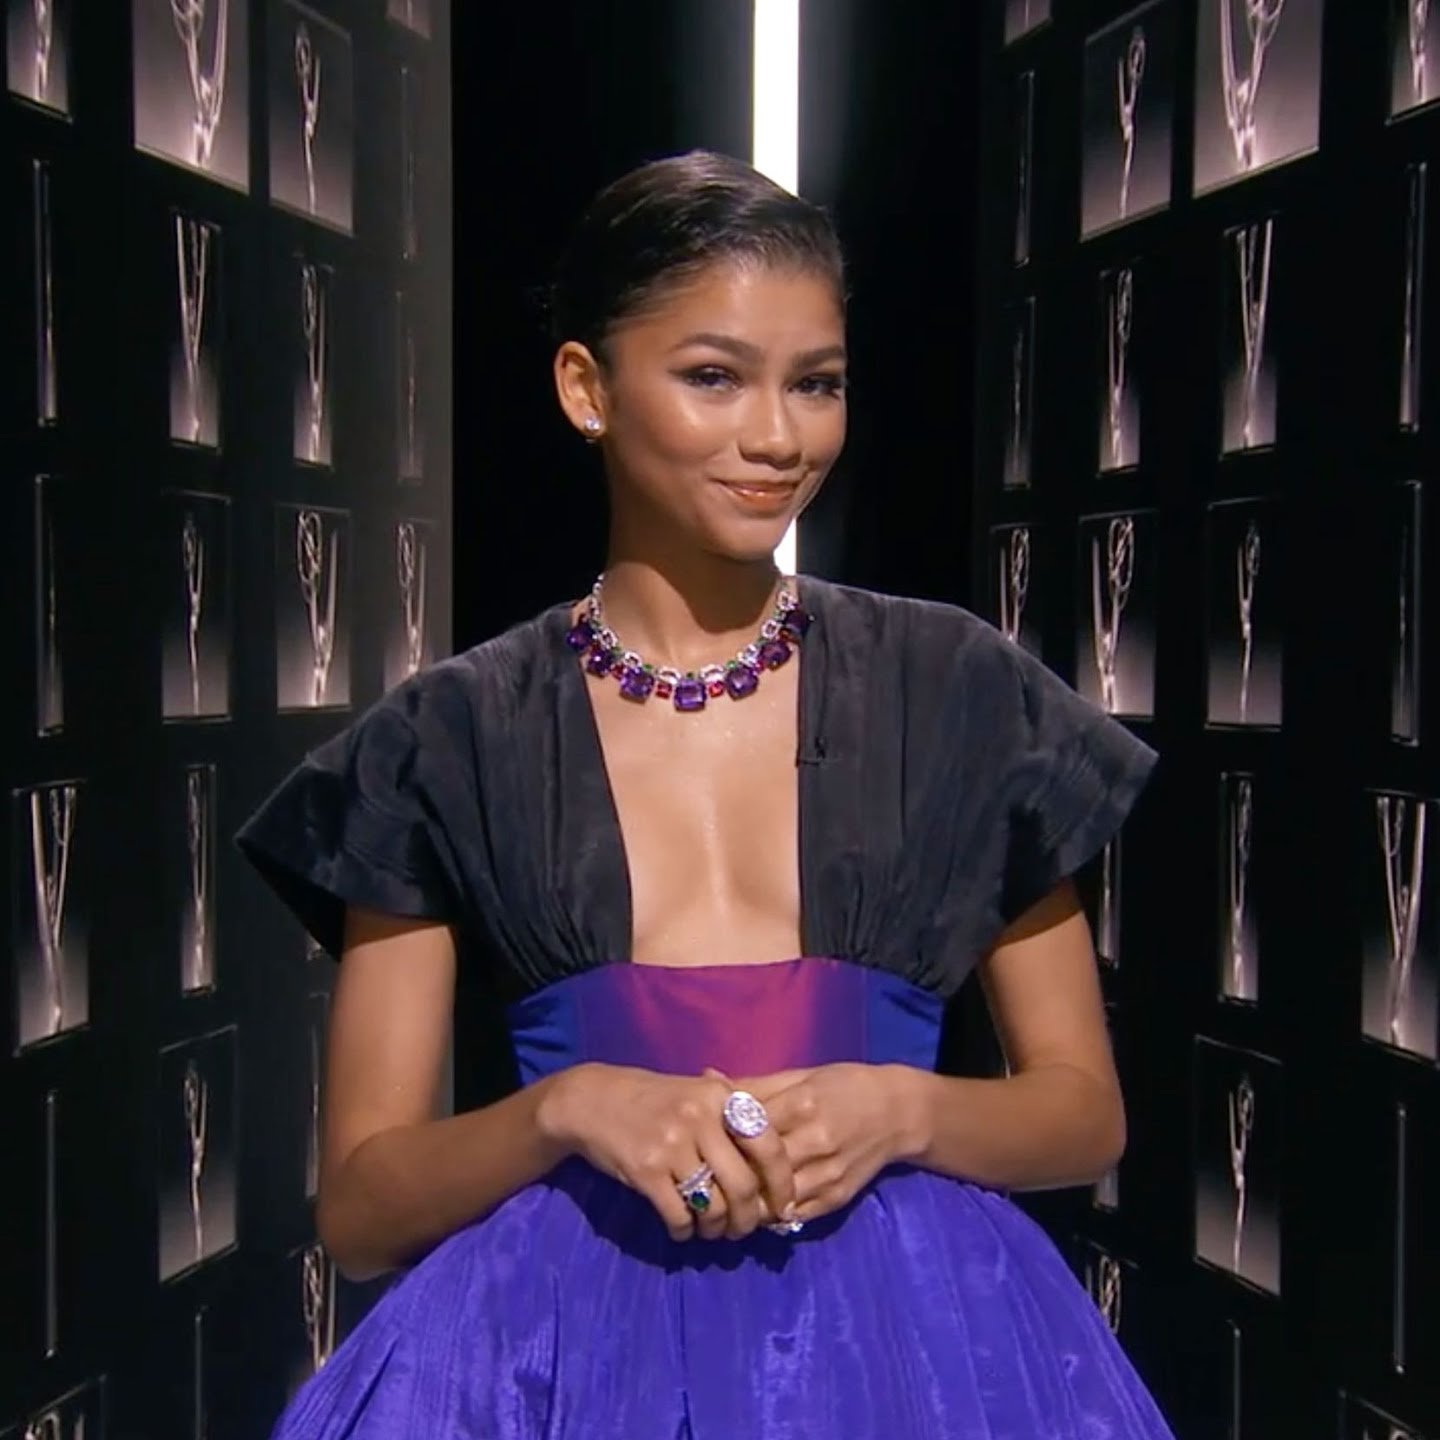 Zendaya makes history as the youngest actress to win Emmys.